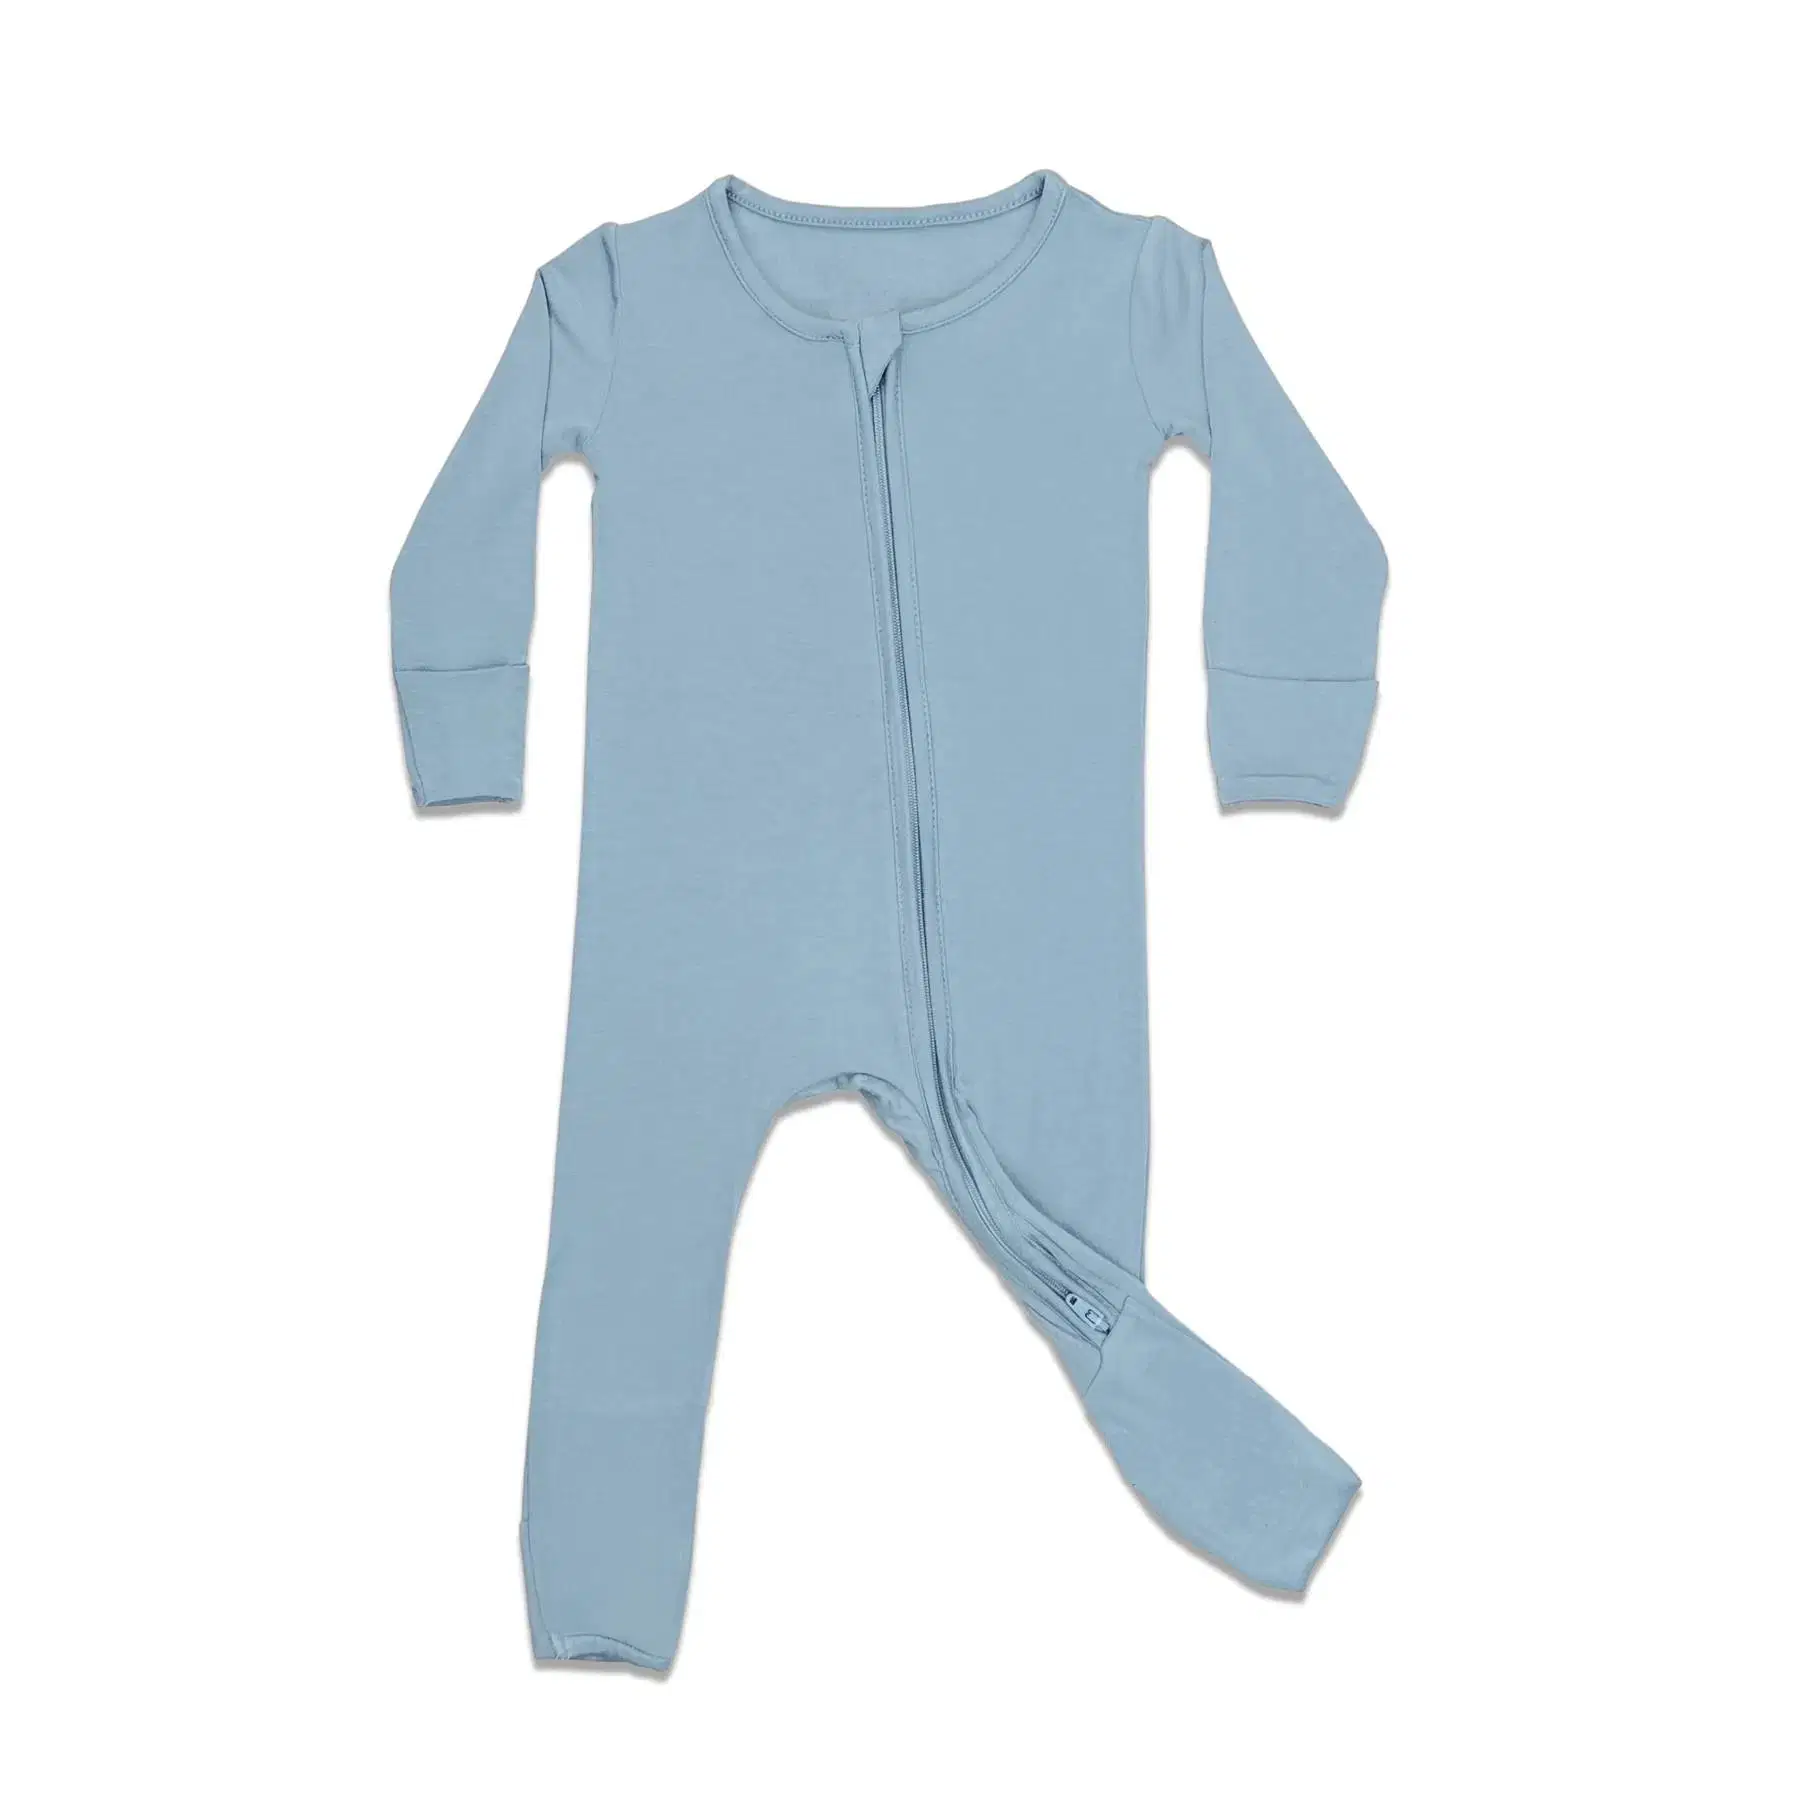 Baby Bamboo Playsuit Convertible Footie Soft Breathable 95% Bamboo Viscose Romper Clothing for Children